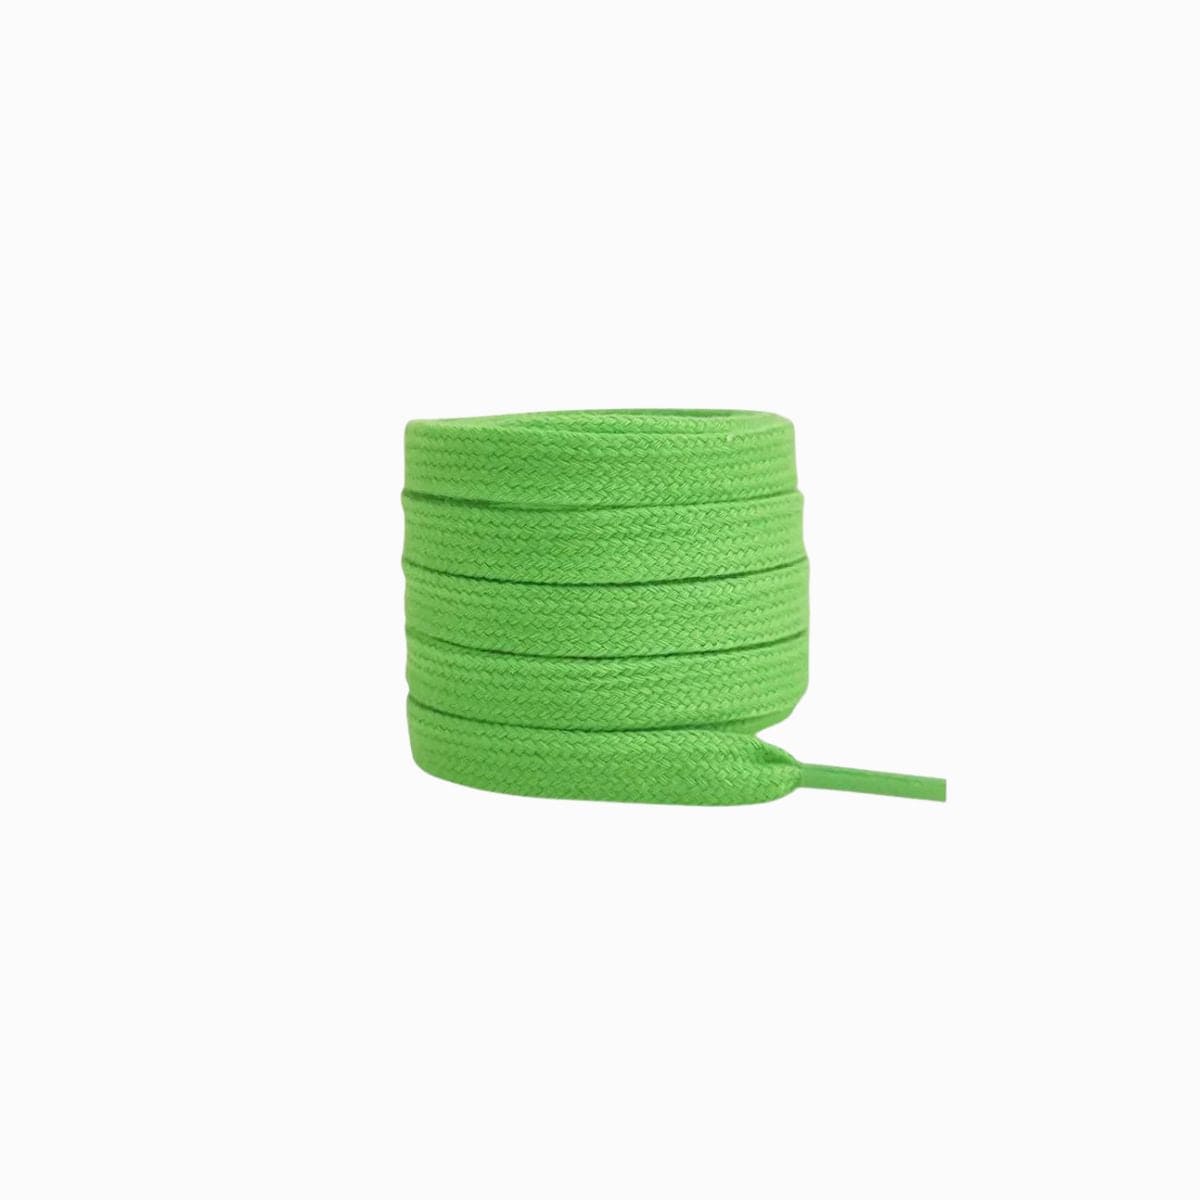 Green Replacement Adidas Shoe Laces for Adidas Samba Black Sneakers by Kicks Shoelaces